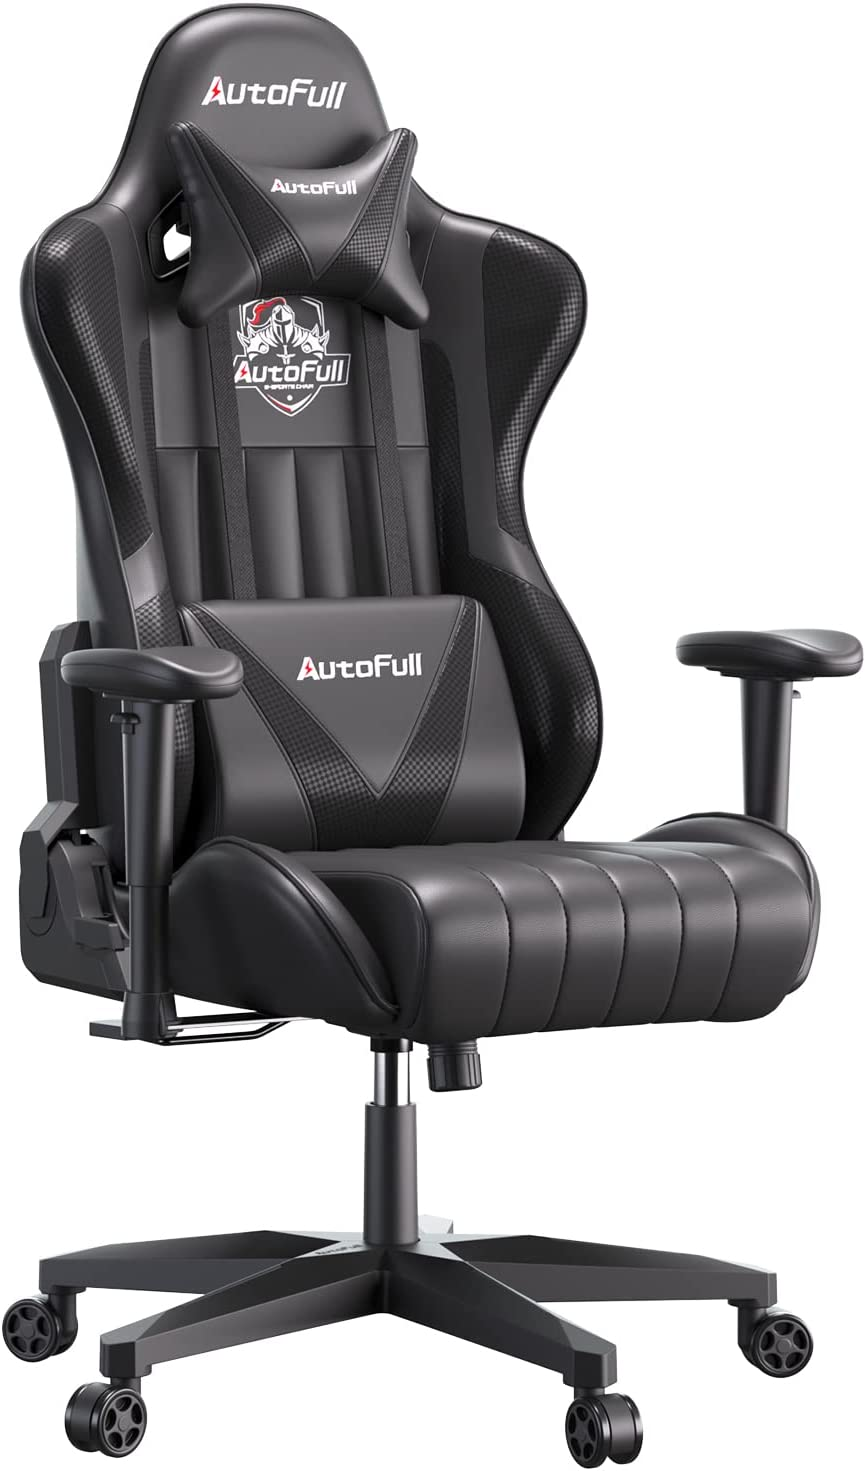 It is worth it to invest in a gaming chair that is made of a durable material like leather or high-quality synthetic leather.